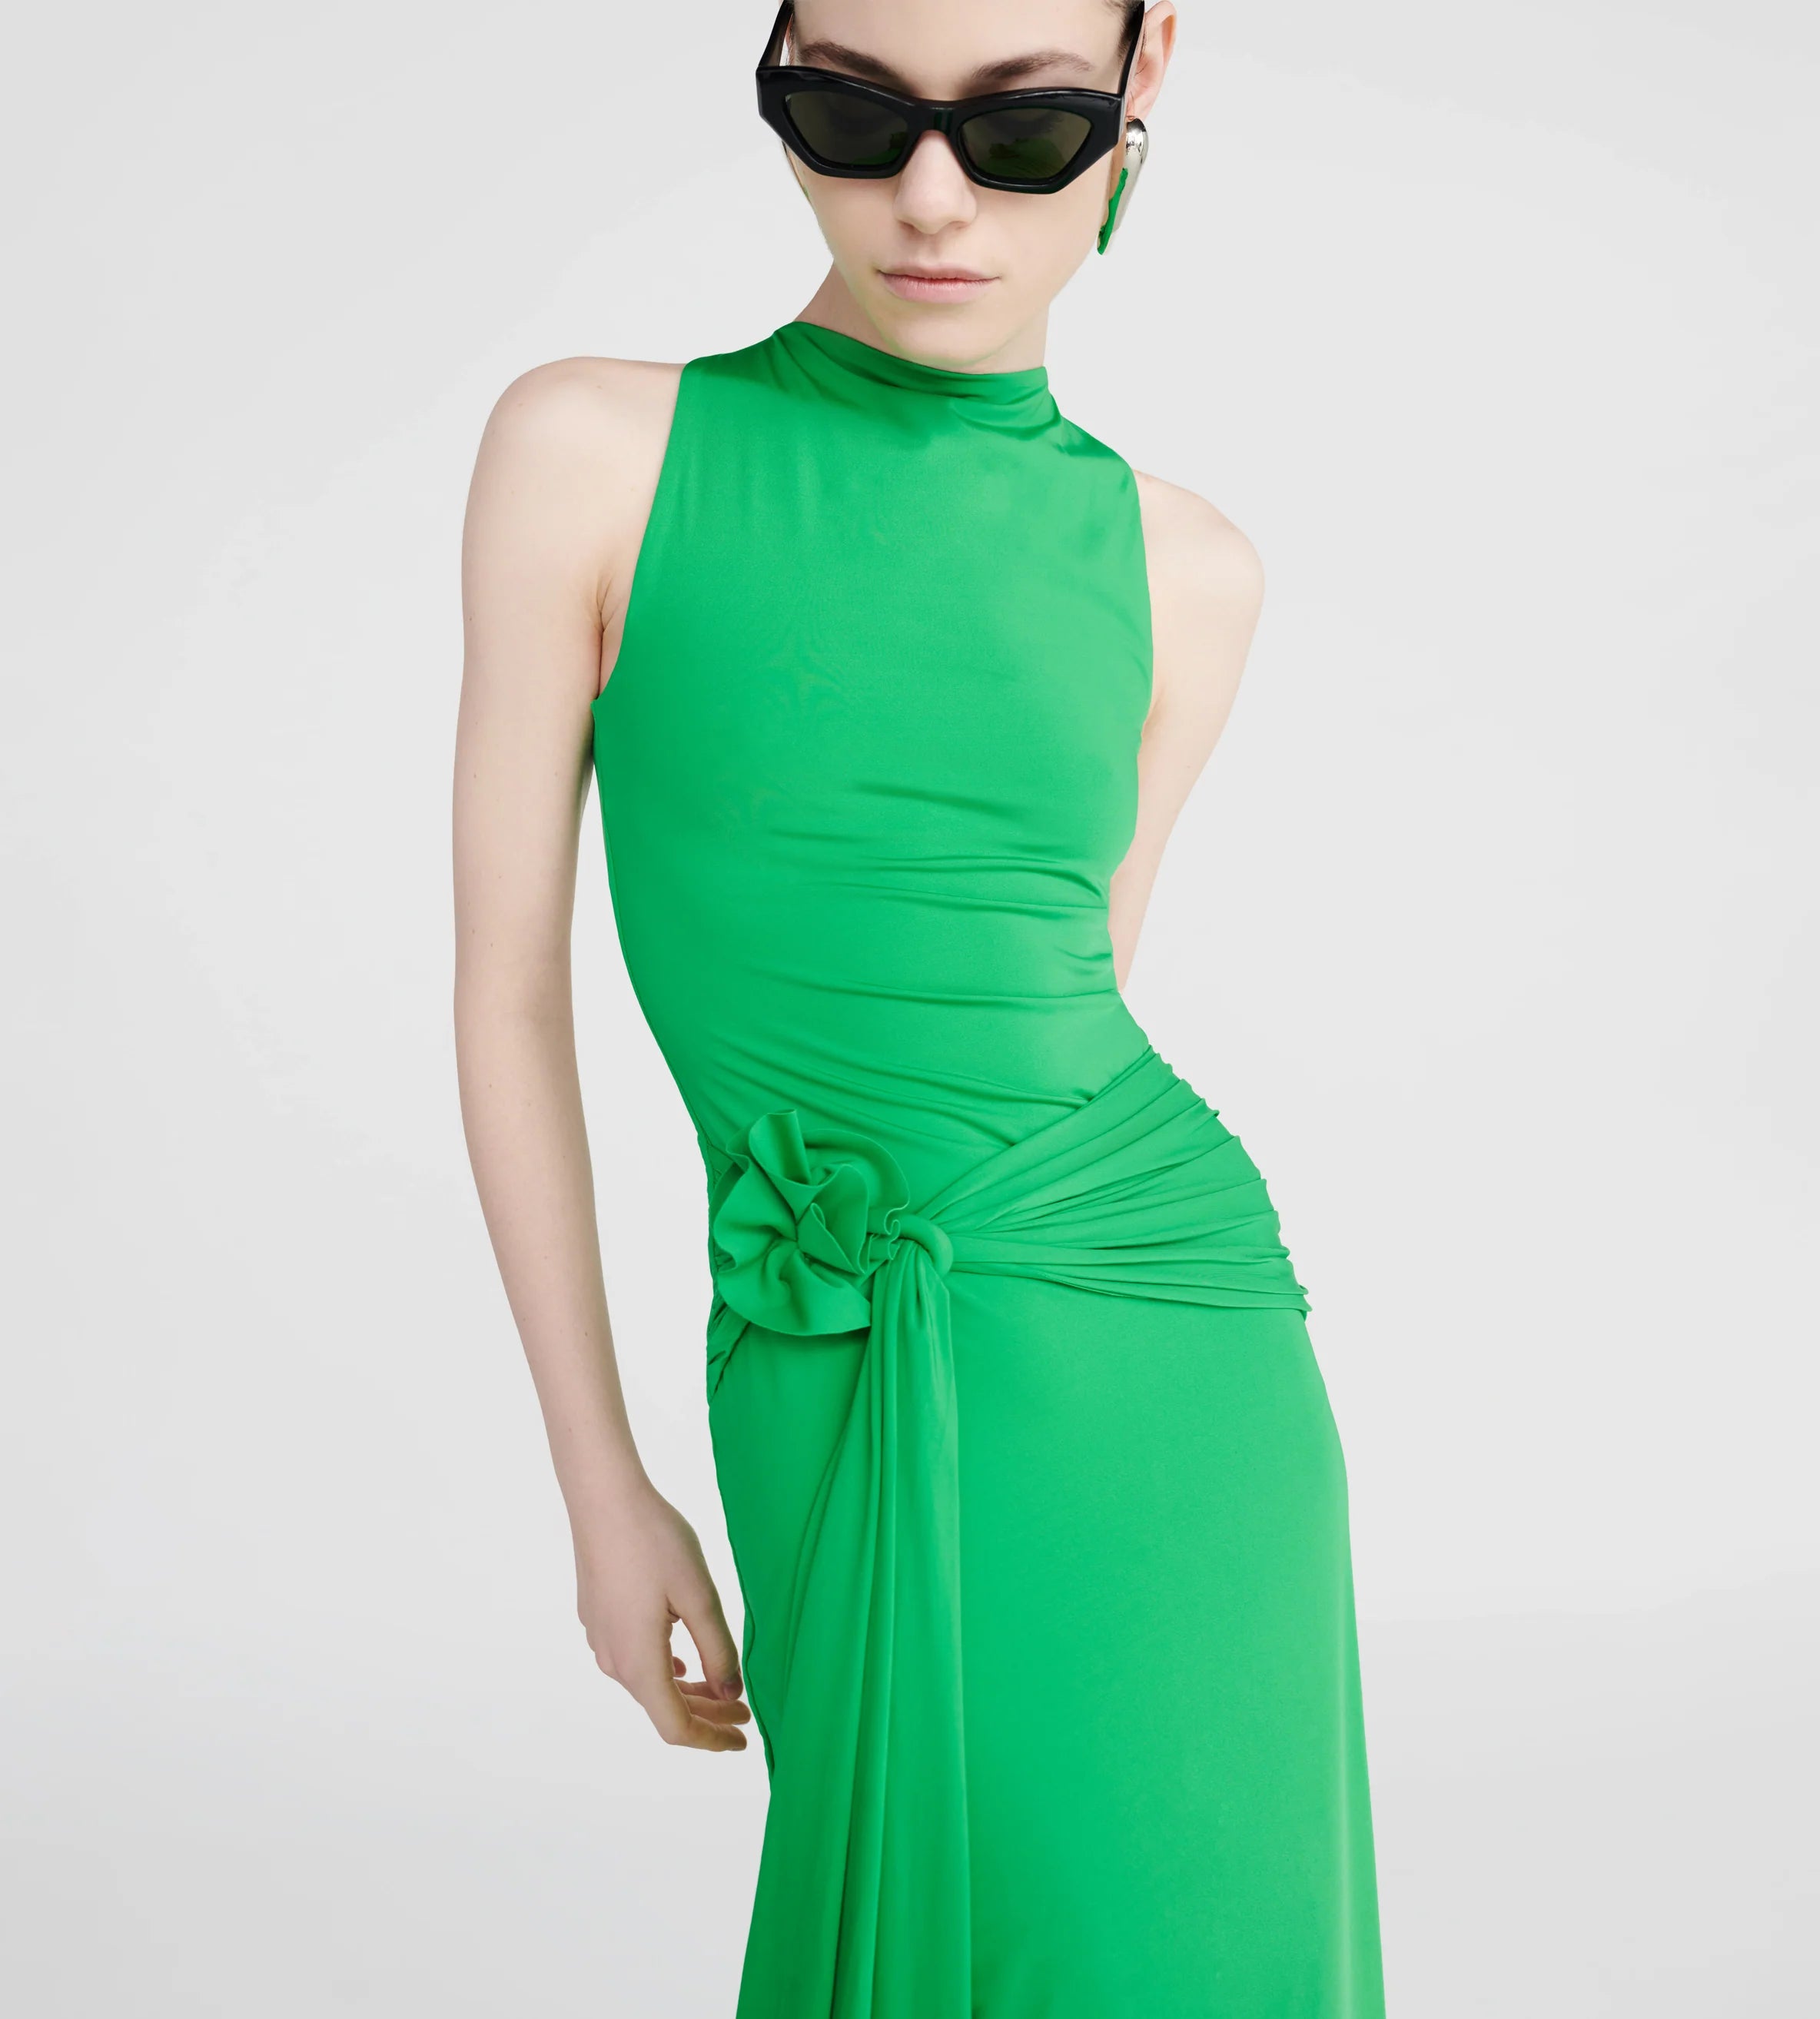 MAYGEL CORONEL TIRSO DRESS IN SPRING GREEN